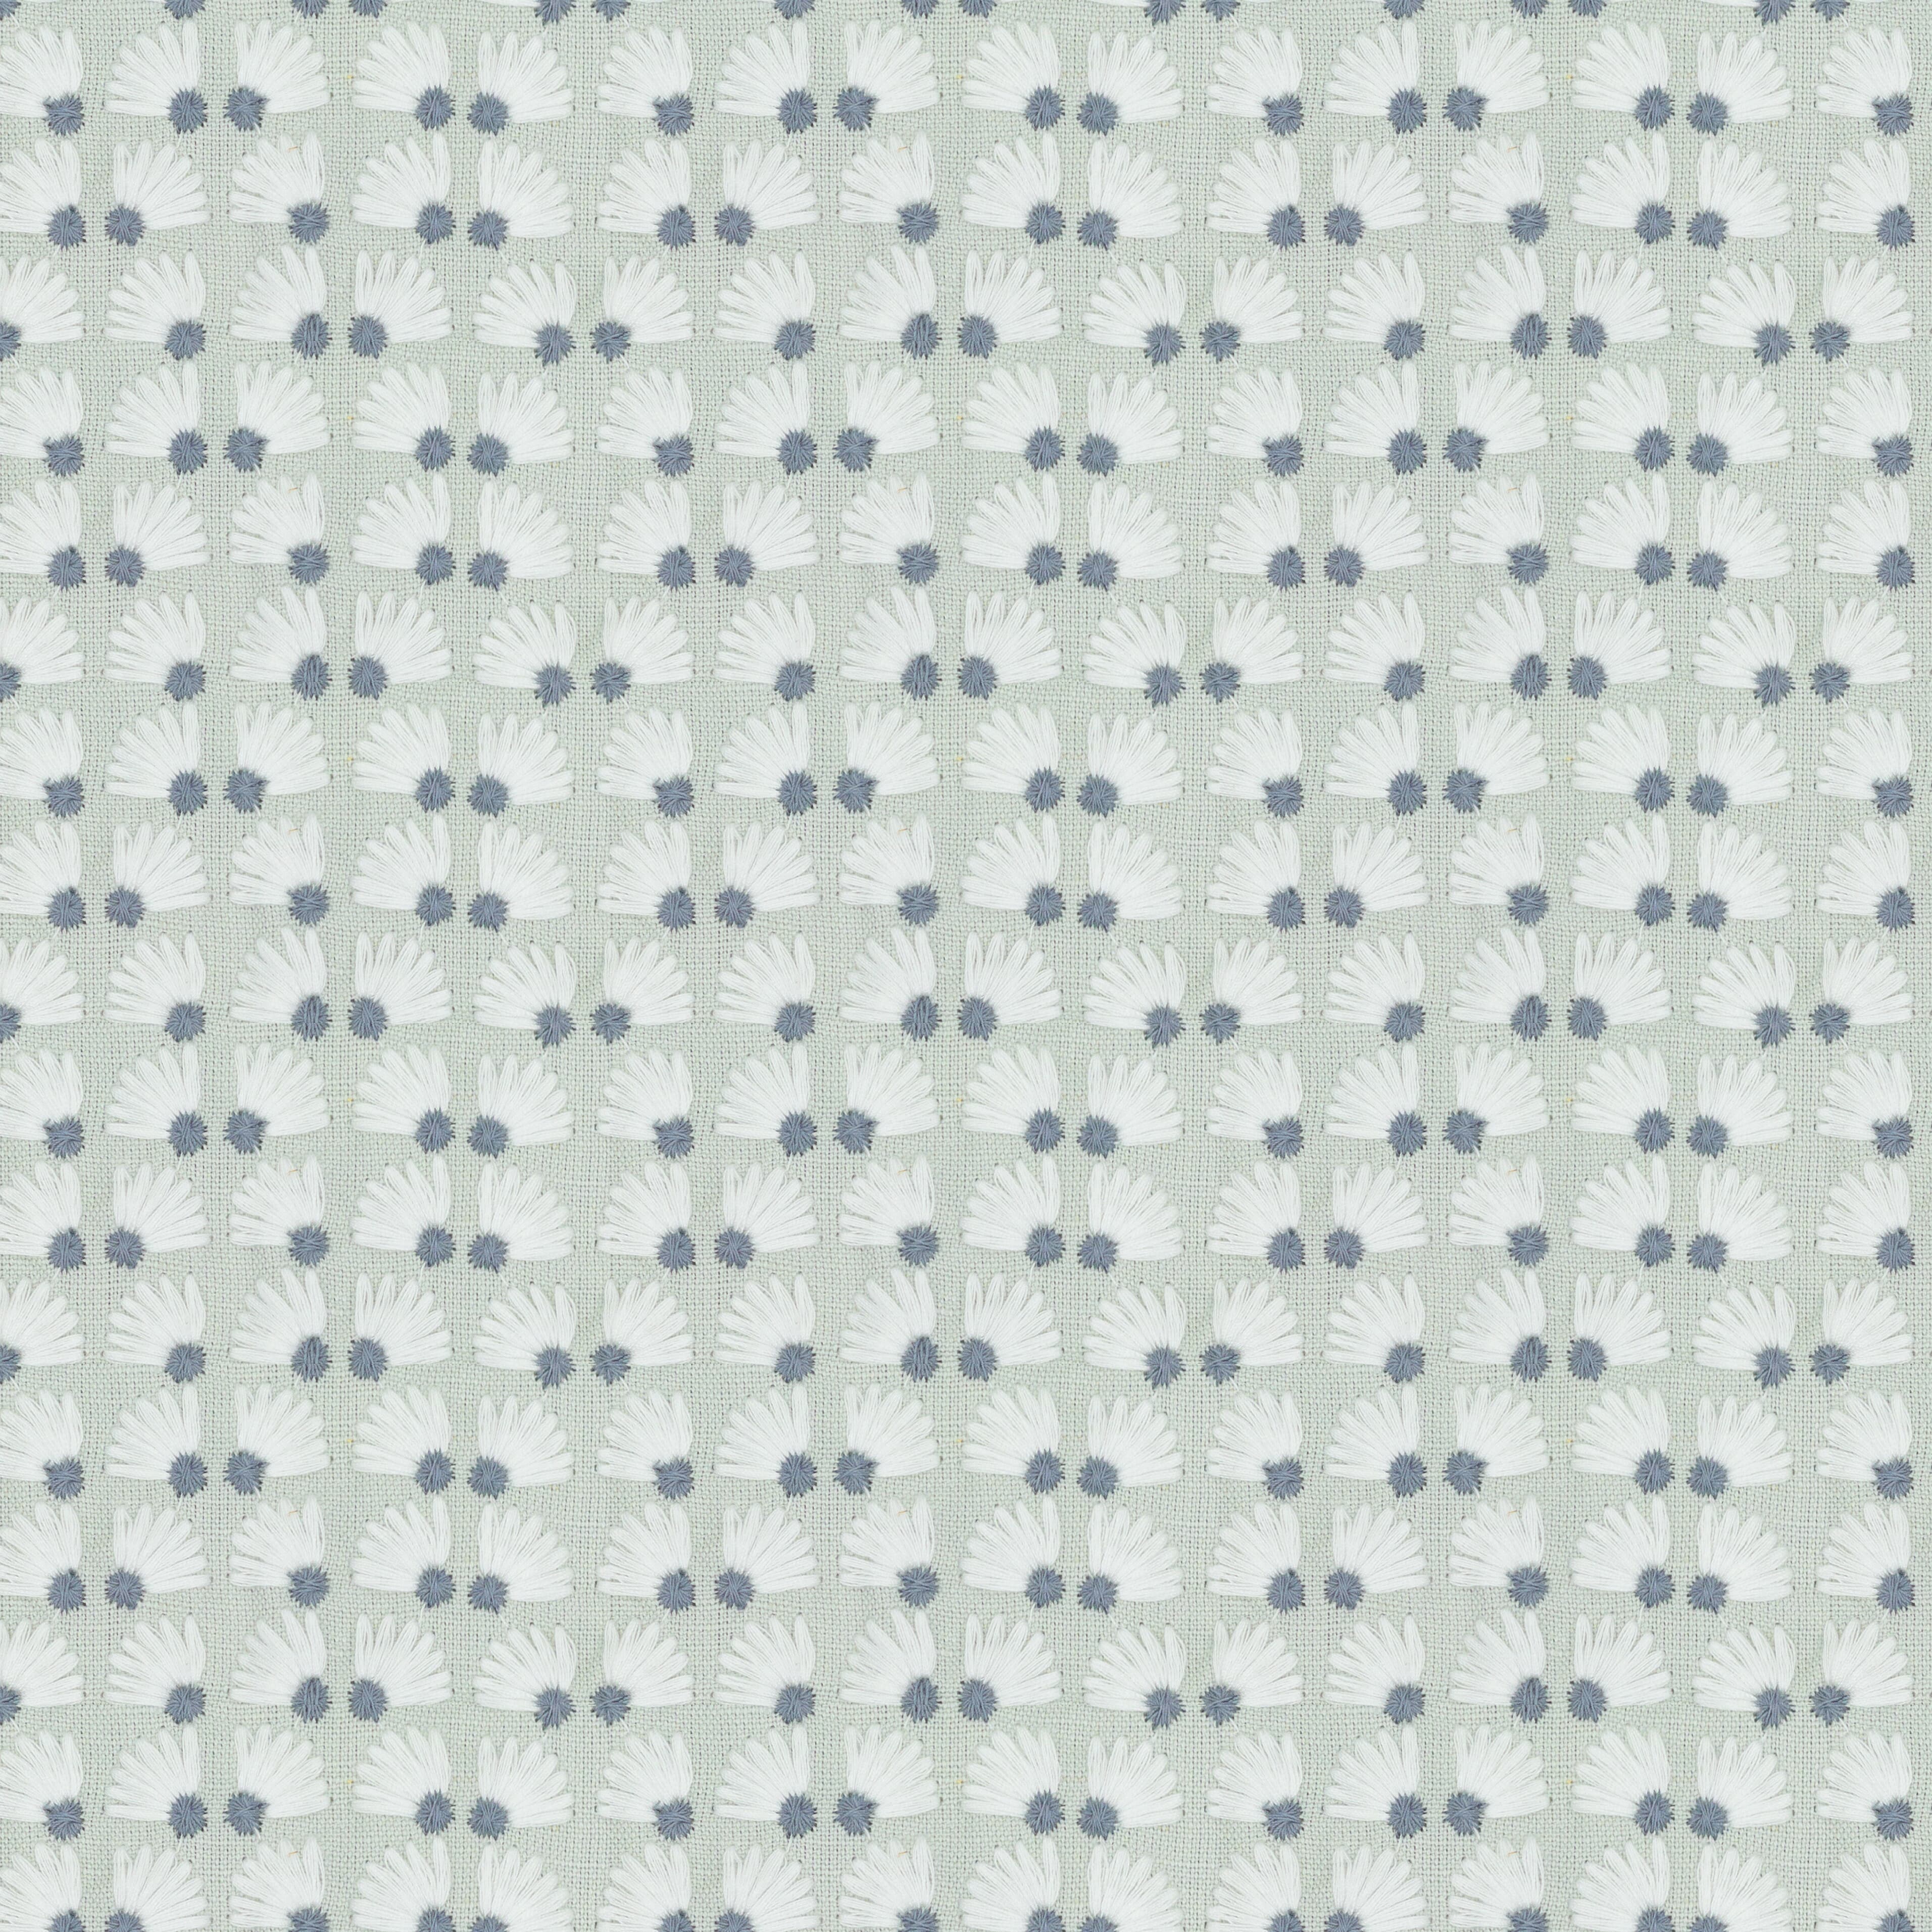 7834-4 Daisypatch Dusk by Stout Fabric